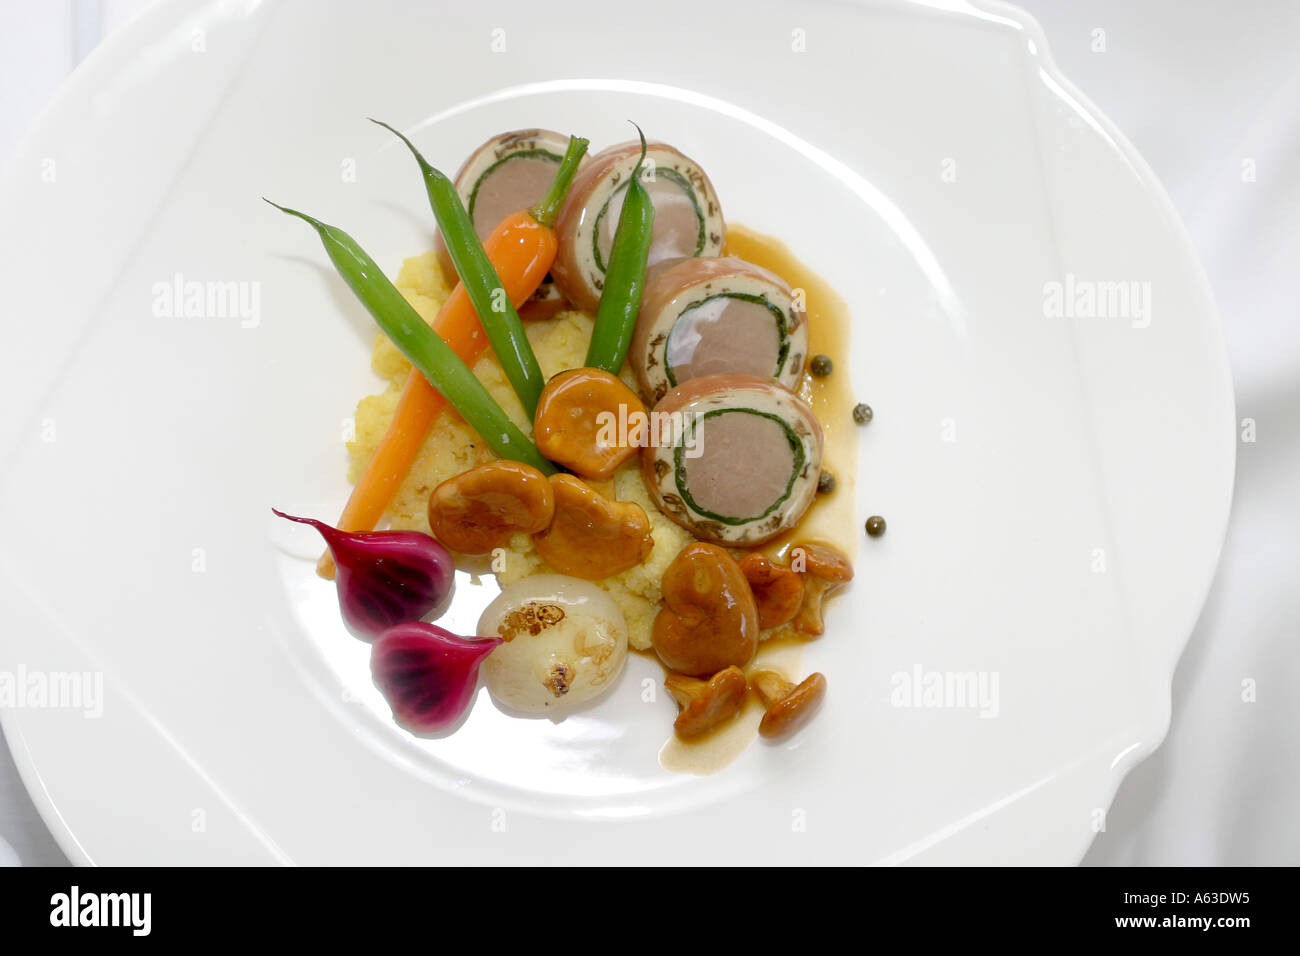 Artistically arranged food plate Stock Photo